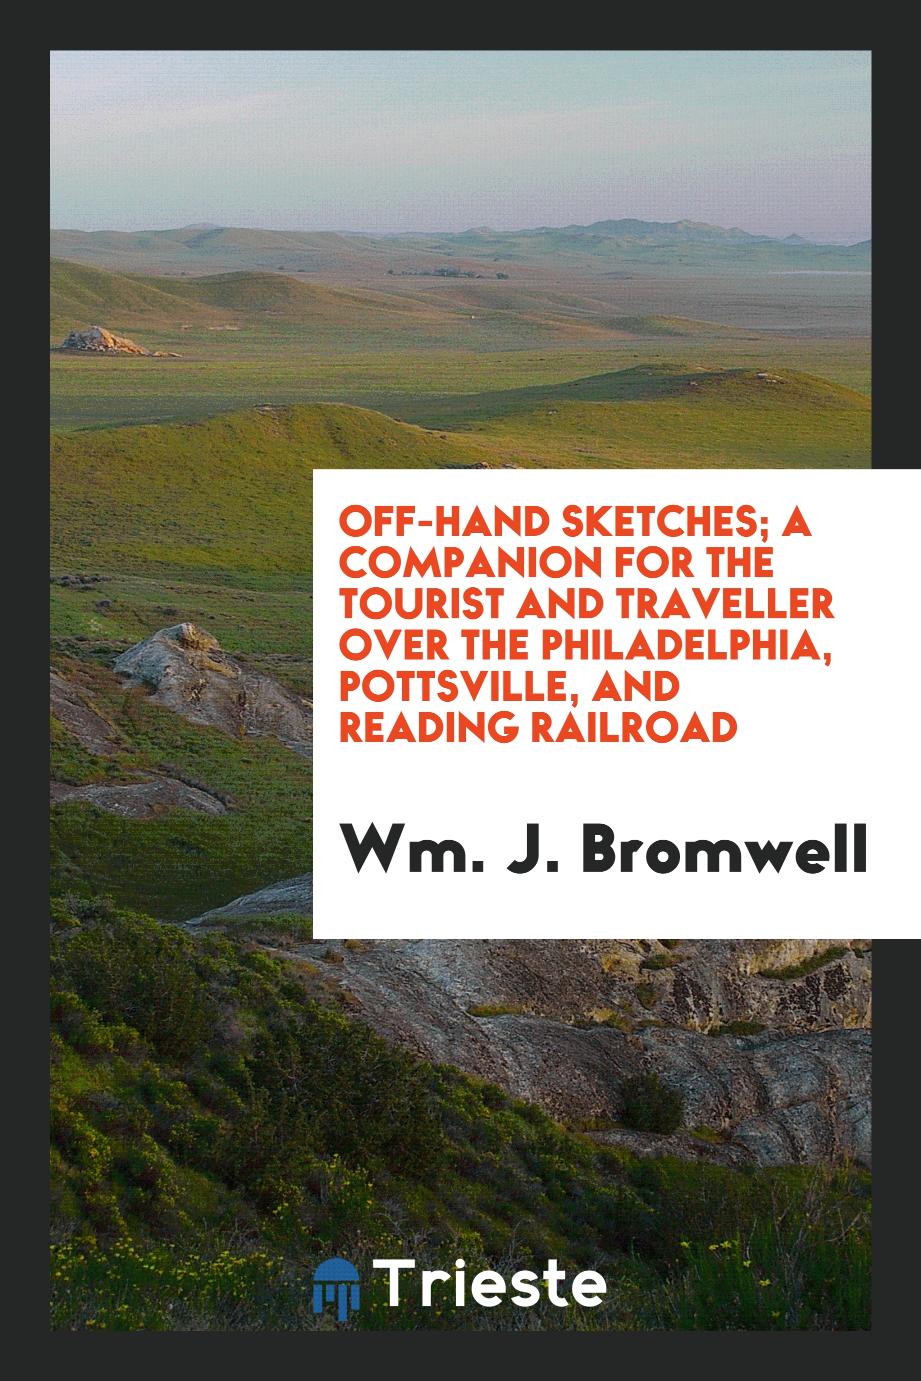 Off-hand sketches; a companion for the tourist and traveller over the Philadelphia, Pottsville, and Reading railroad